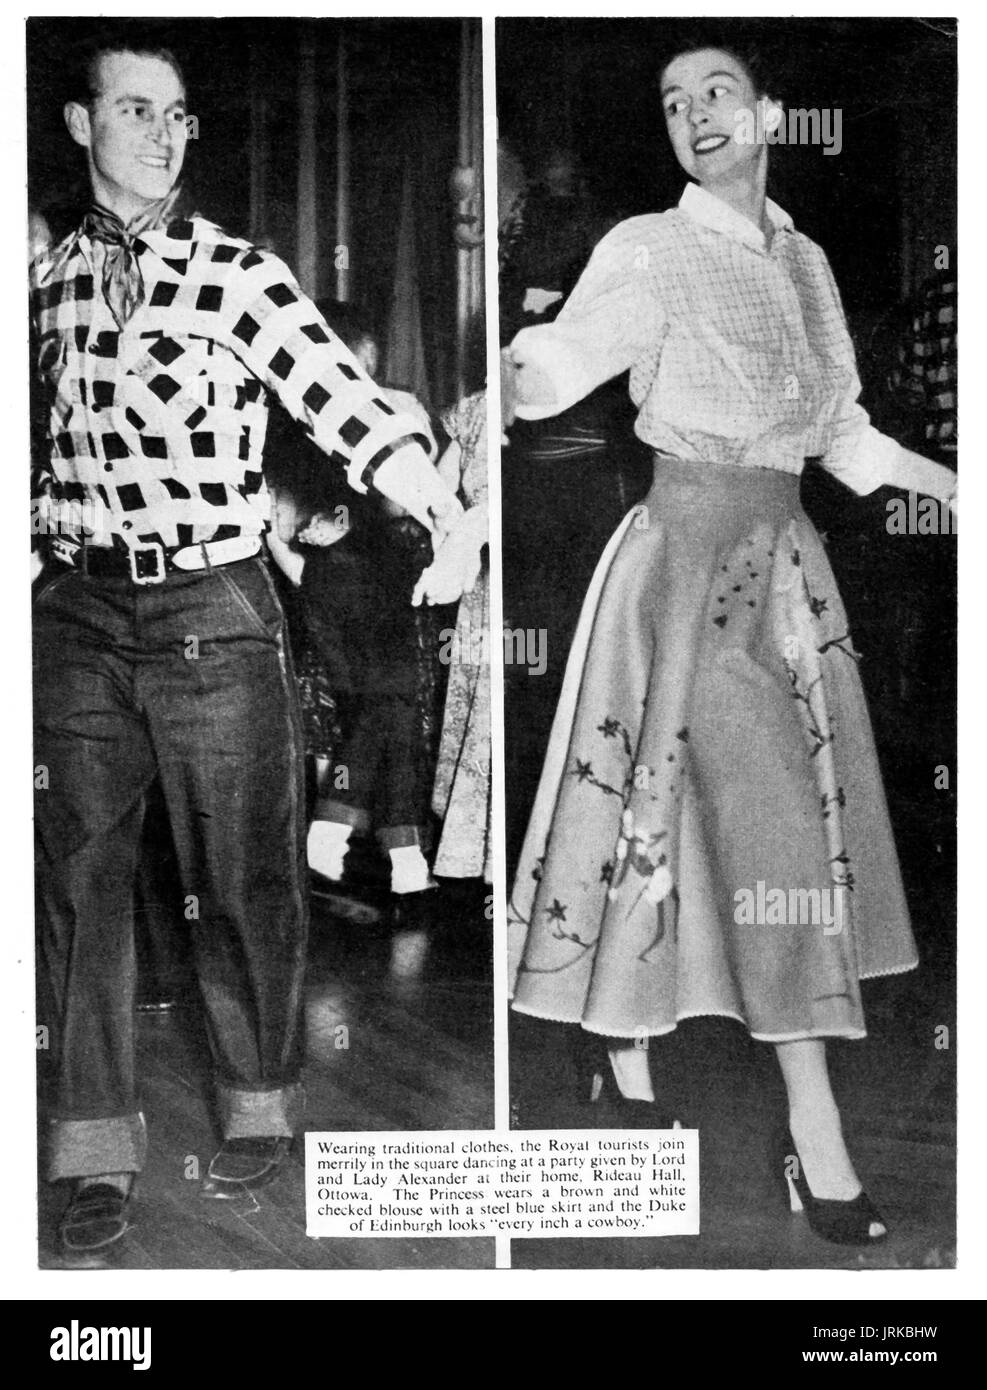 Magazine page illustration from  1951 showing the Duke of Edinburgh and Princess Elizabeth (later Queen Elizabeth II of Britain)  country dancing in Canada. Stock Photo